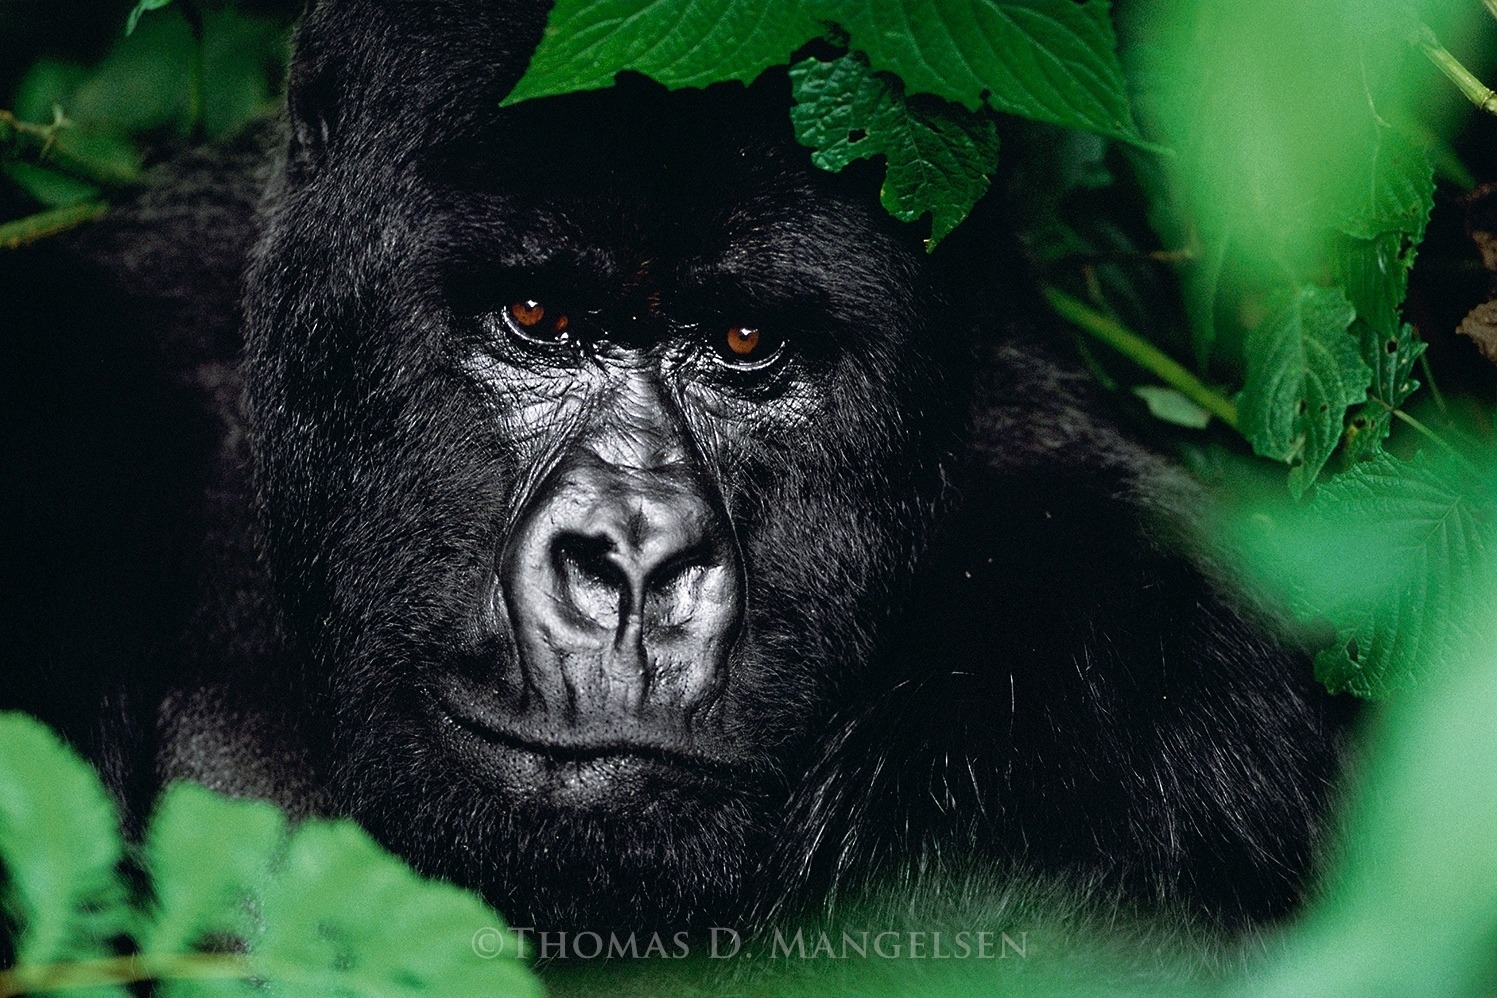 &quot;In Gentle Giant,&quot; a mountain gorilla hides among the underbrush in the Virunga Mountains of Rwanda.  Photograph courtesy Thomas D. Mangelsen